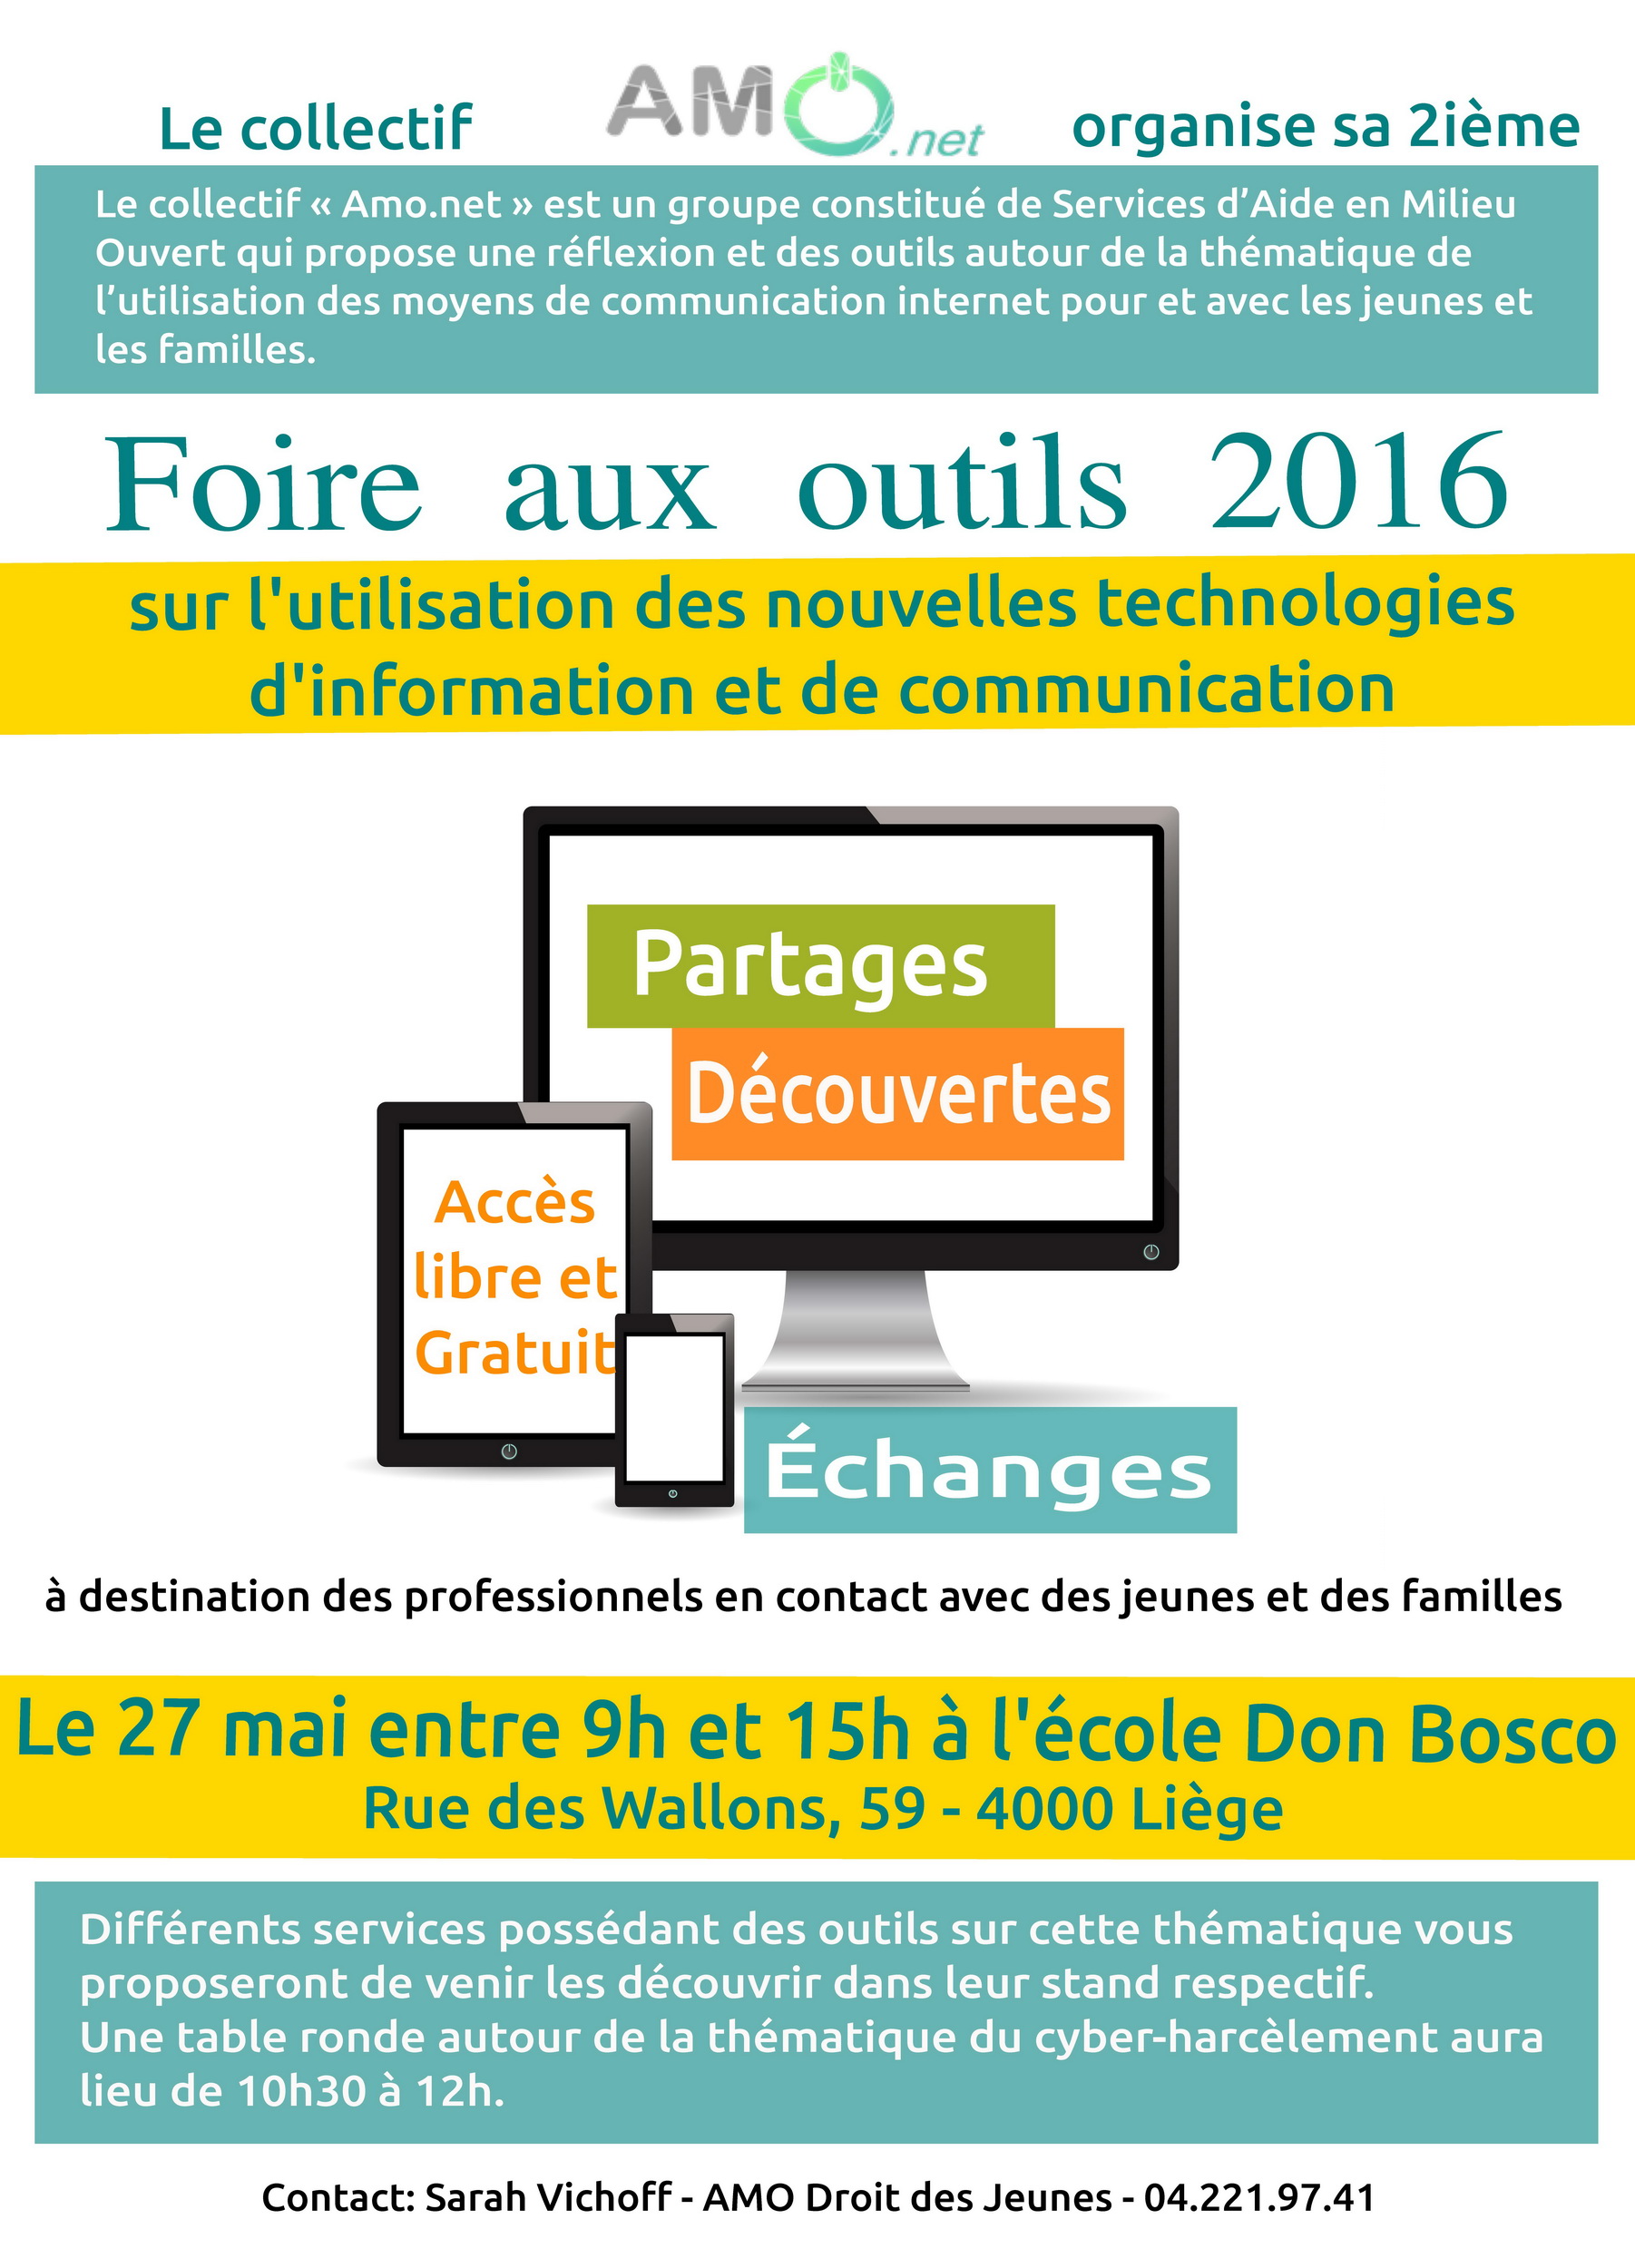 You are currently viewing 2ème Foire aux outils AMOnet